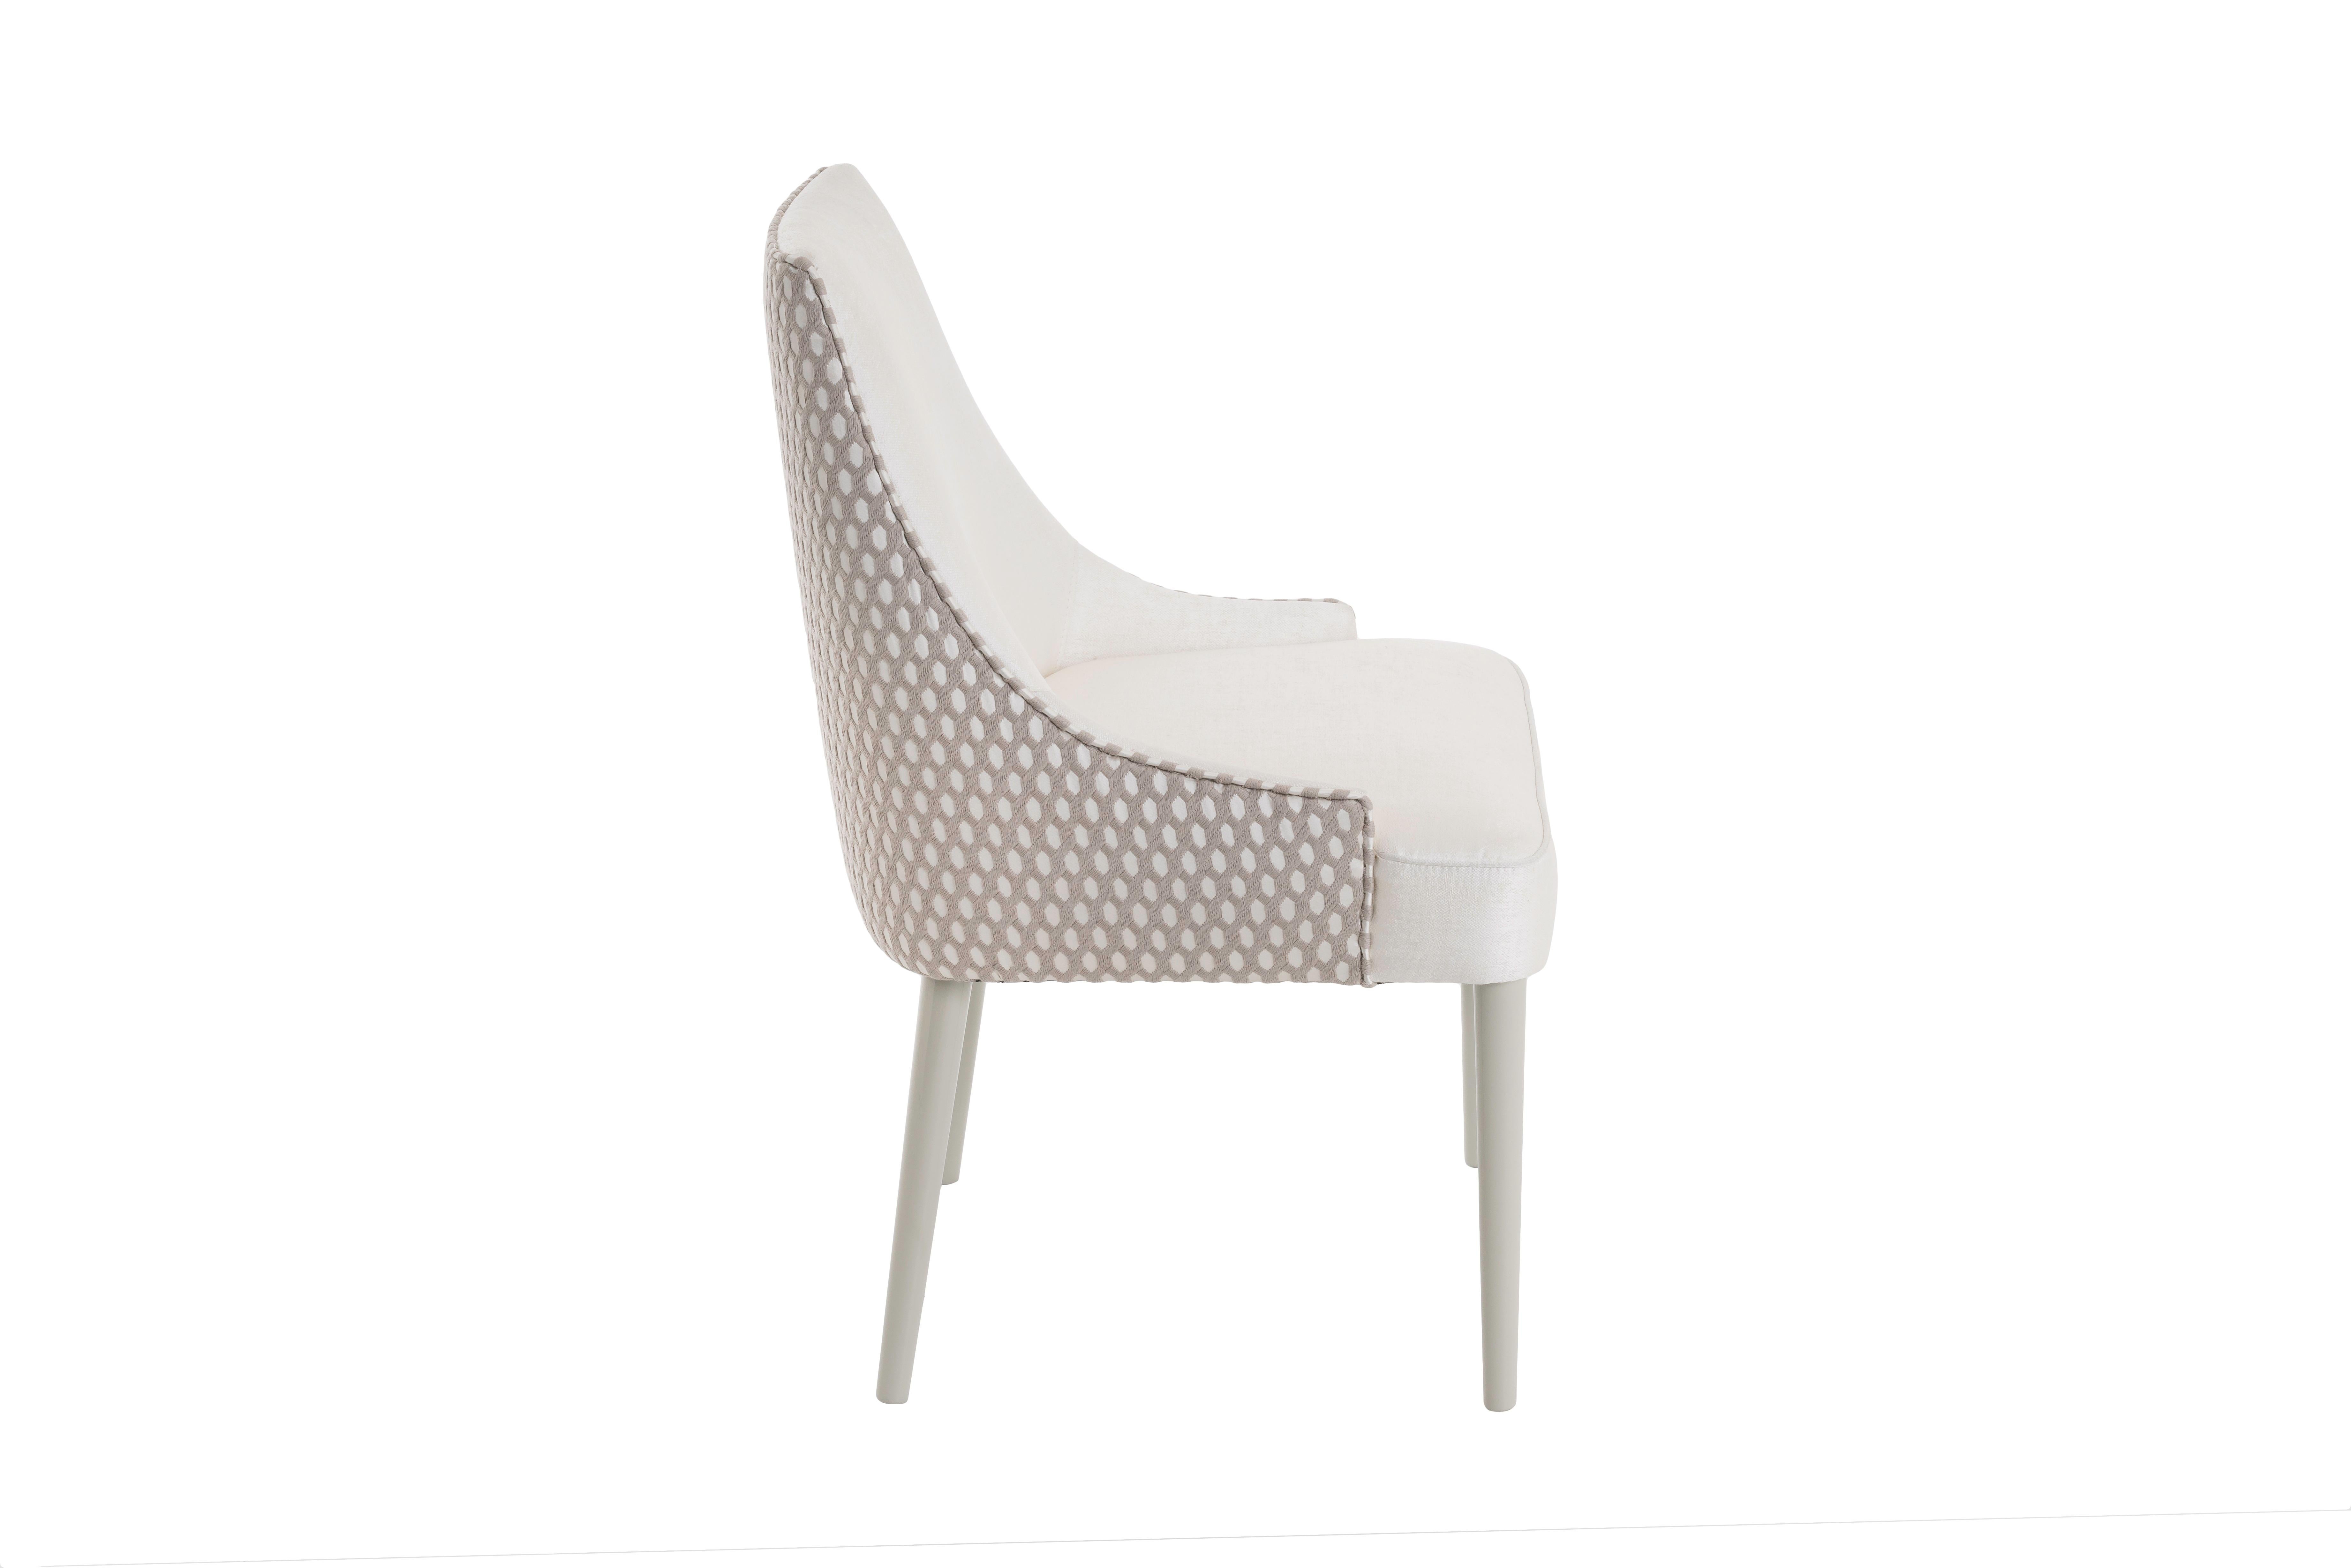 Portuguese BOAVISTA Dining Chair with two fabrics